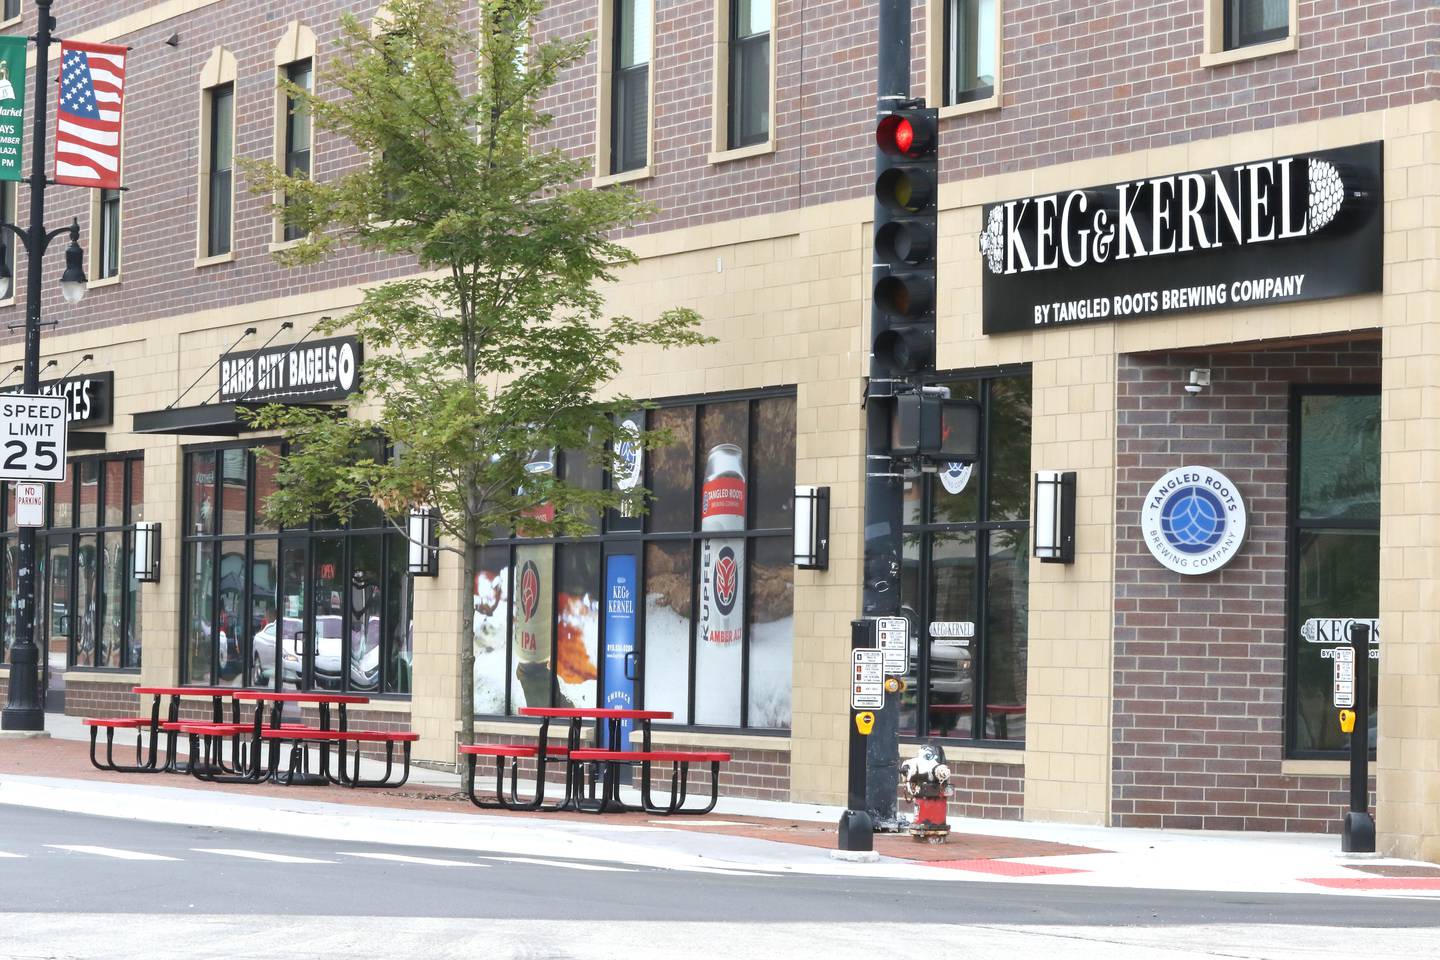 Some of the outdoor seating now available Thursday, Aug. 25, 2022, in front of Barb City Bagels and Keg and Kernel on Lincoln Highway after the recent downtown DeKalb renovations.